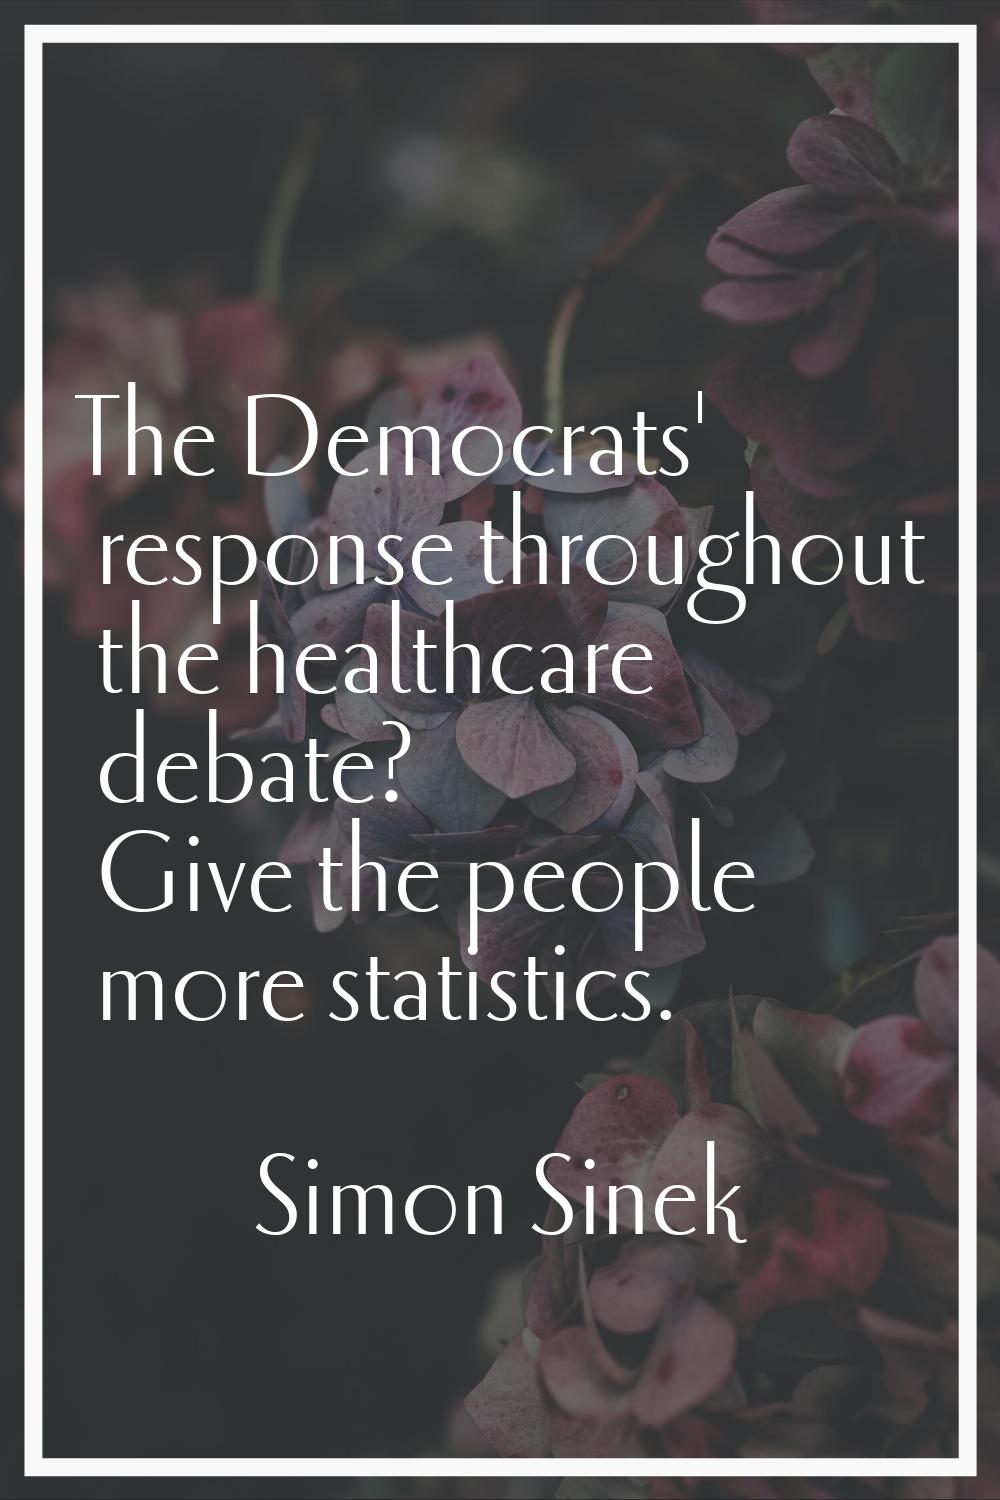 The Democrats' response throughout the healthcare debate? Give the people more statistics.